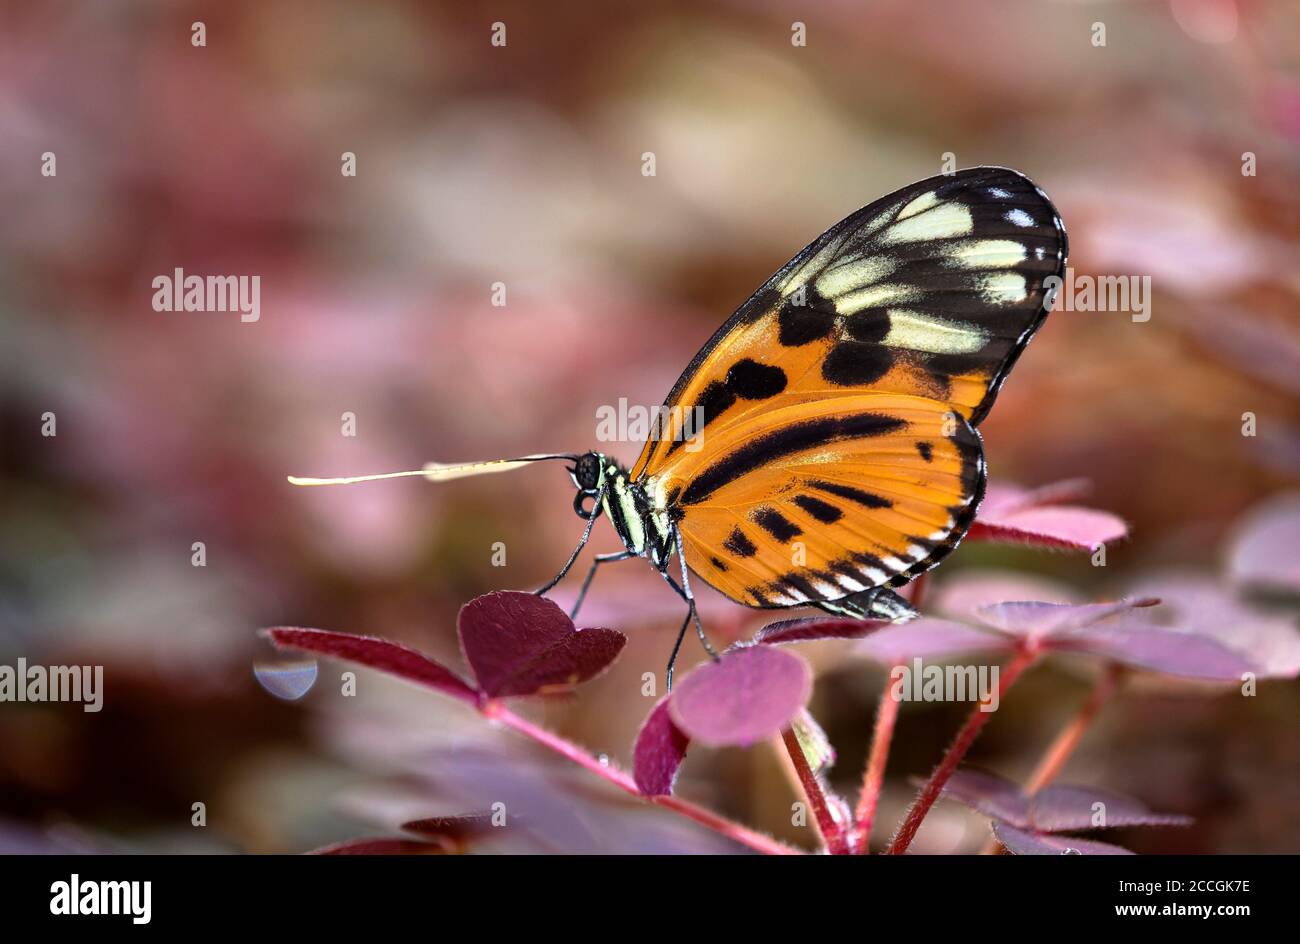 Neotropical butterfly Heliconius hecale, family of noble butterflies (Nymphalidae), Mindo, Ecuador Stock Photo